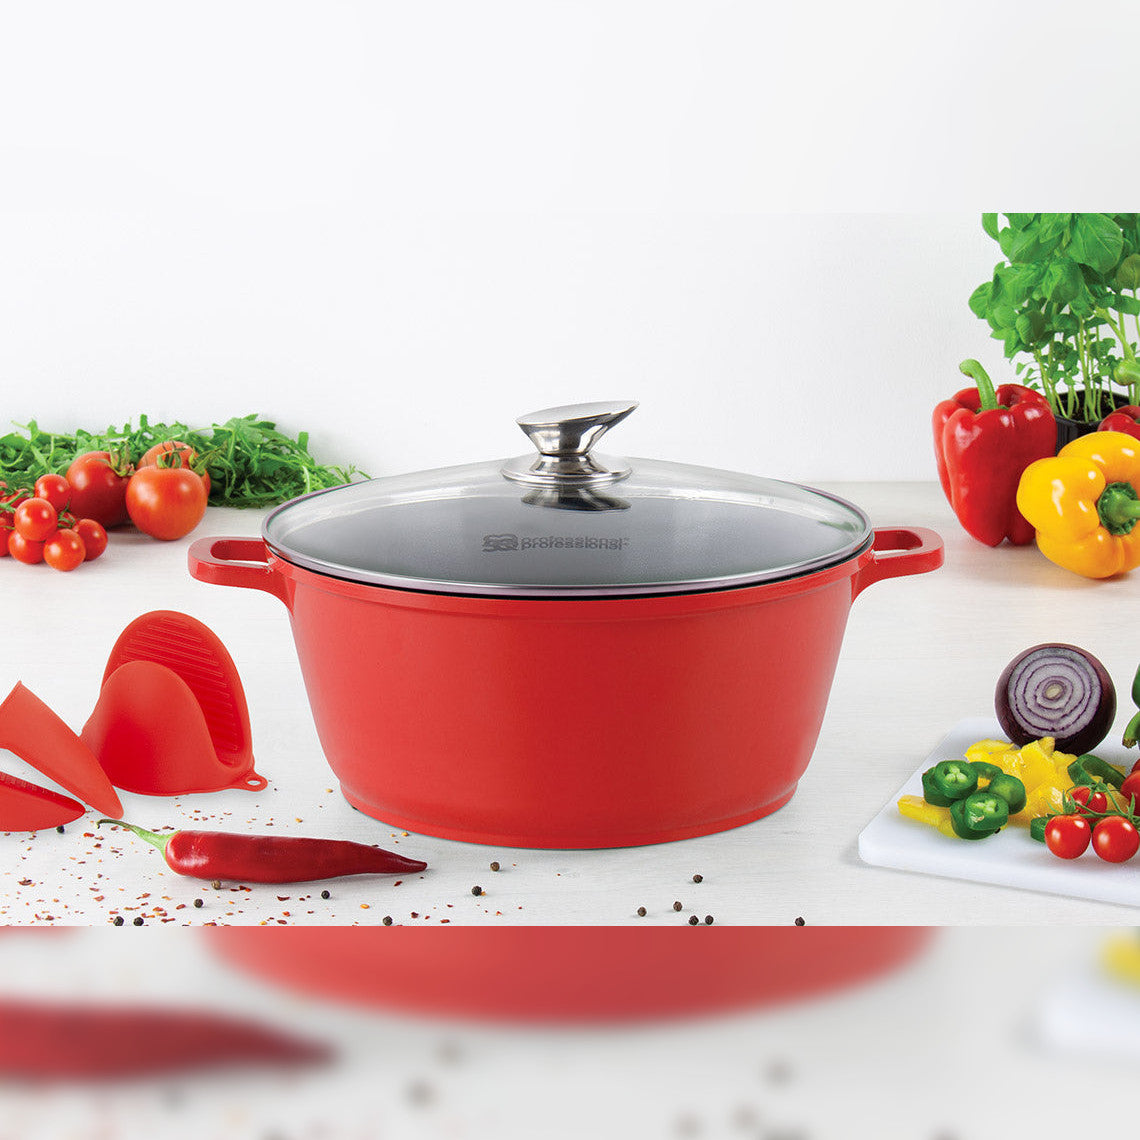 Die Cast Stockpot - Induction Base - NEA - Red- 20cm